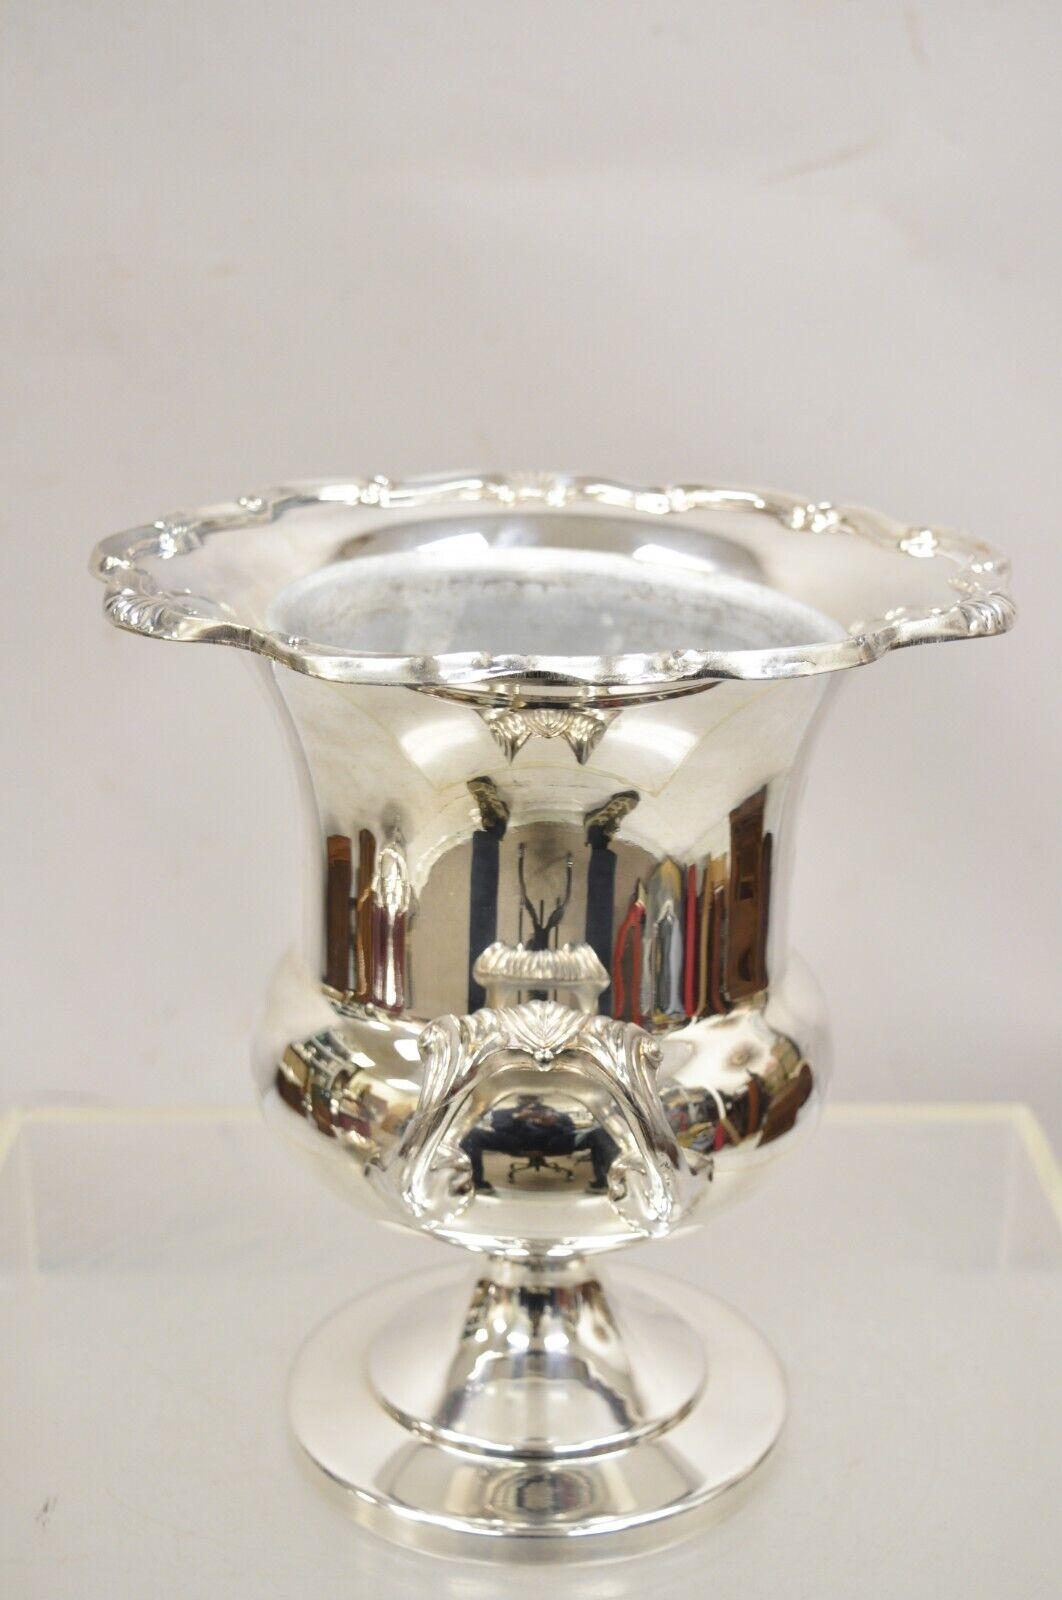 Vintage Towle Silver Plated Champagne Chiller Ice Bucket Trophy Cup graviert 